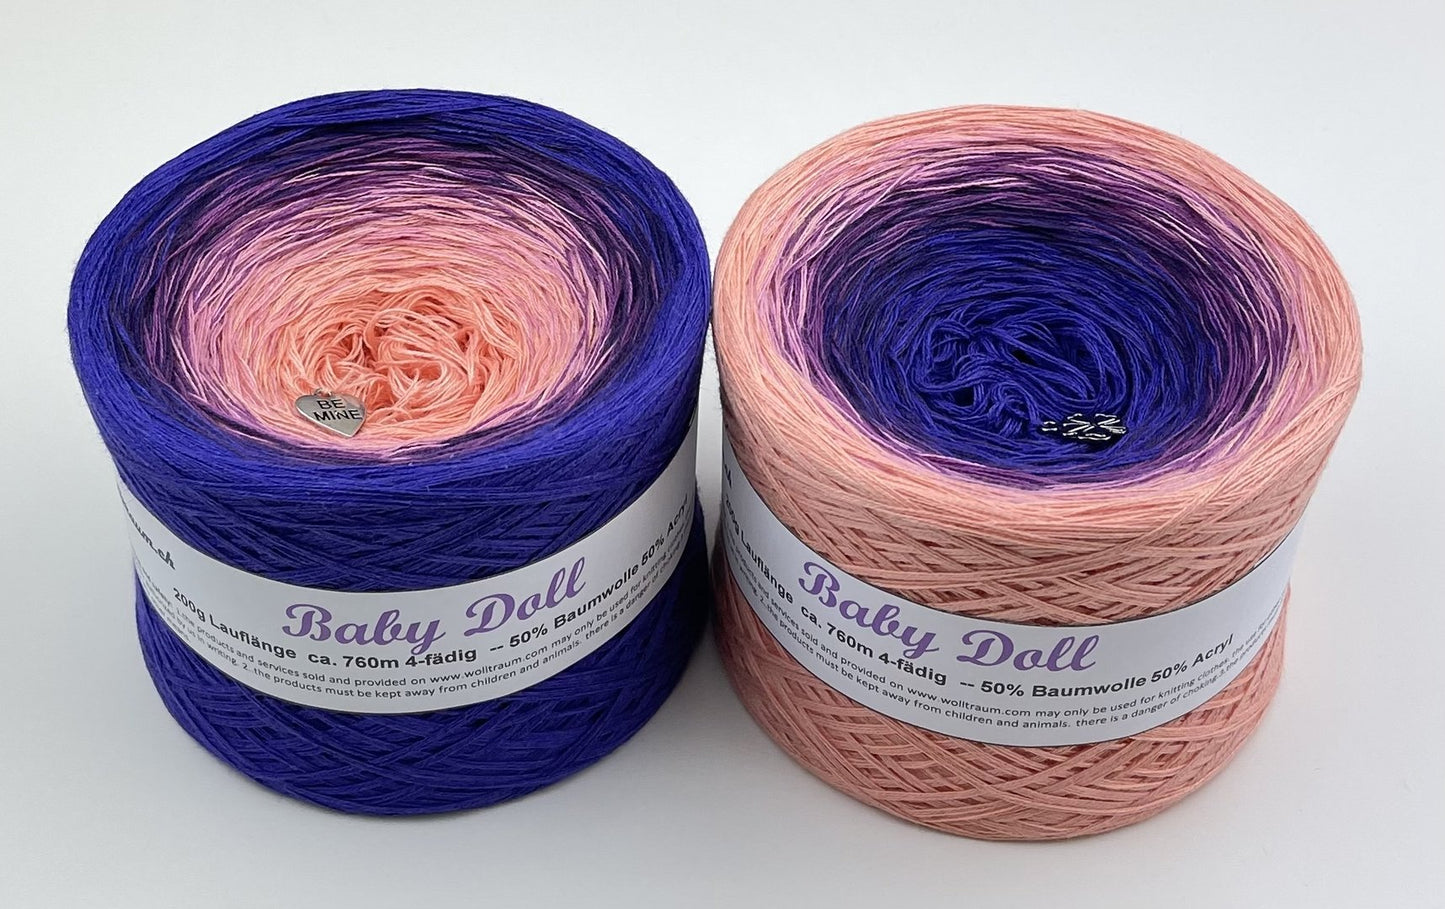 The Wolltraum My Melodyy gradient yarn in the colour Baby Doll.  It goes from a peach tone to a deep blue.